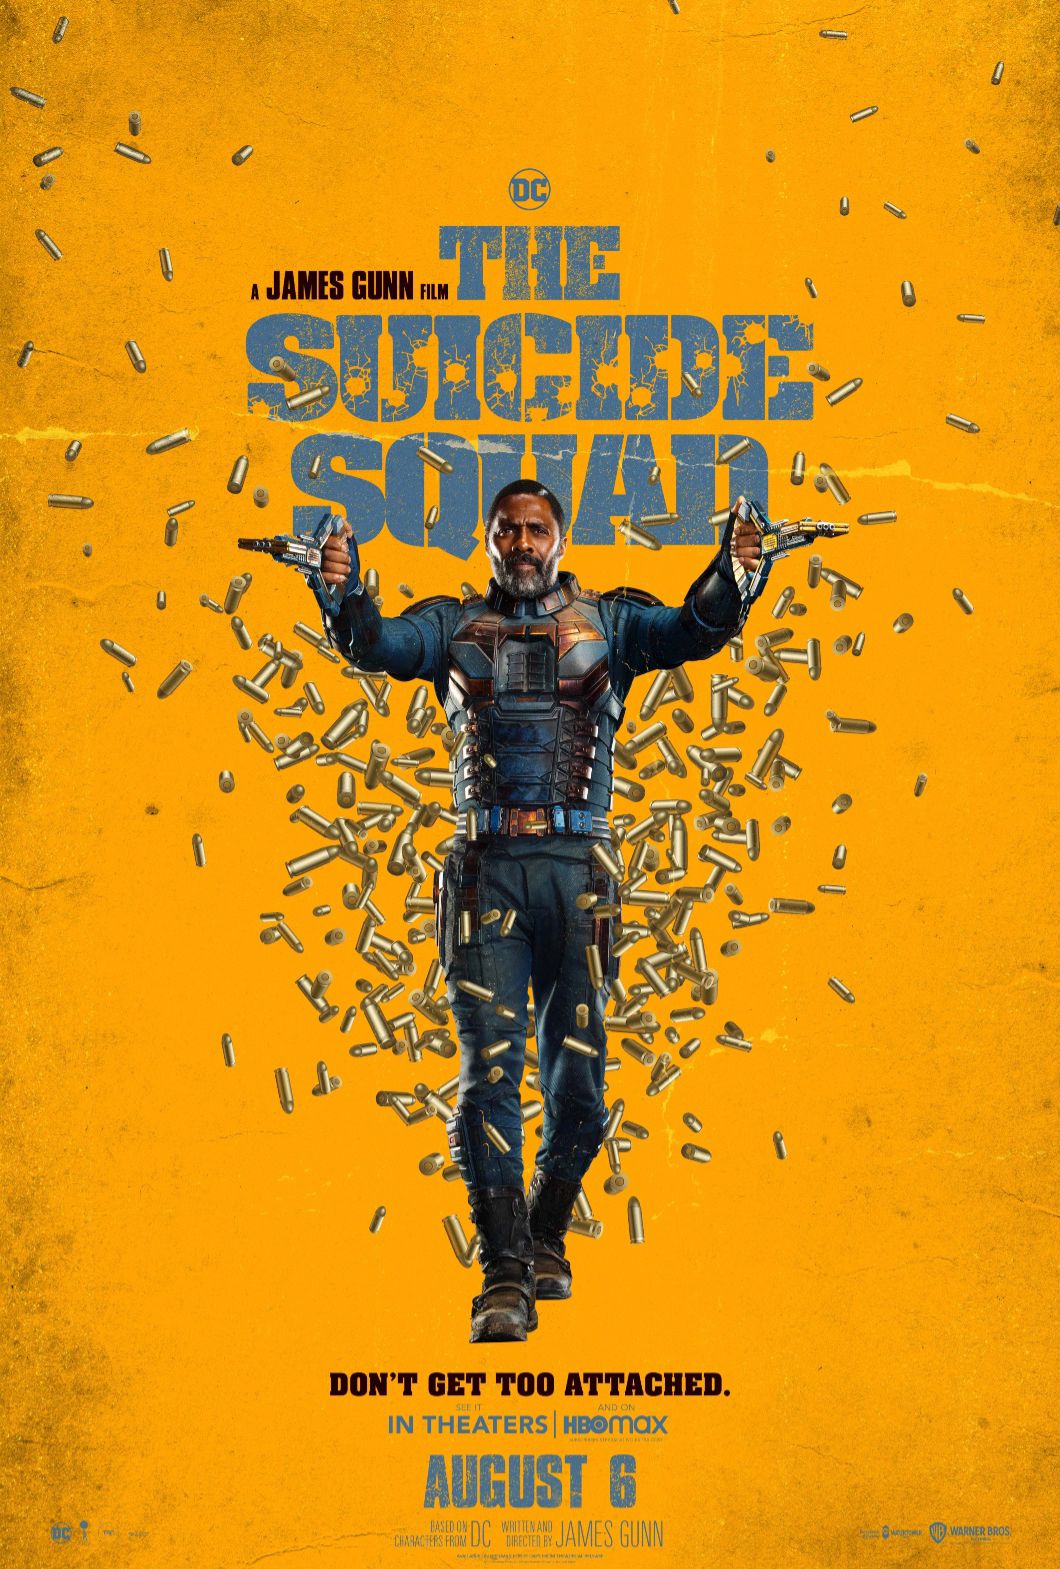 The Suicide Squad character poster #1